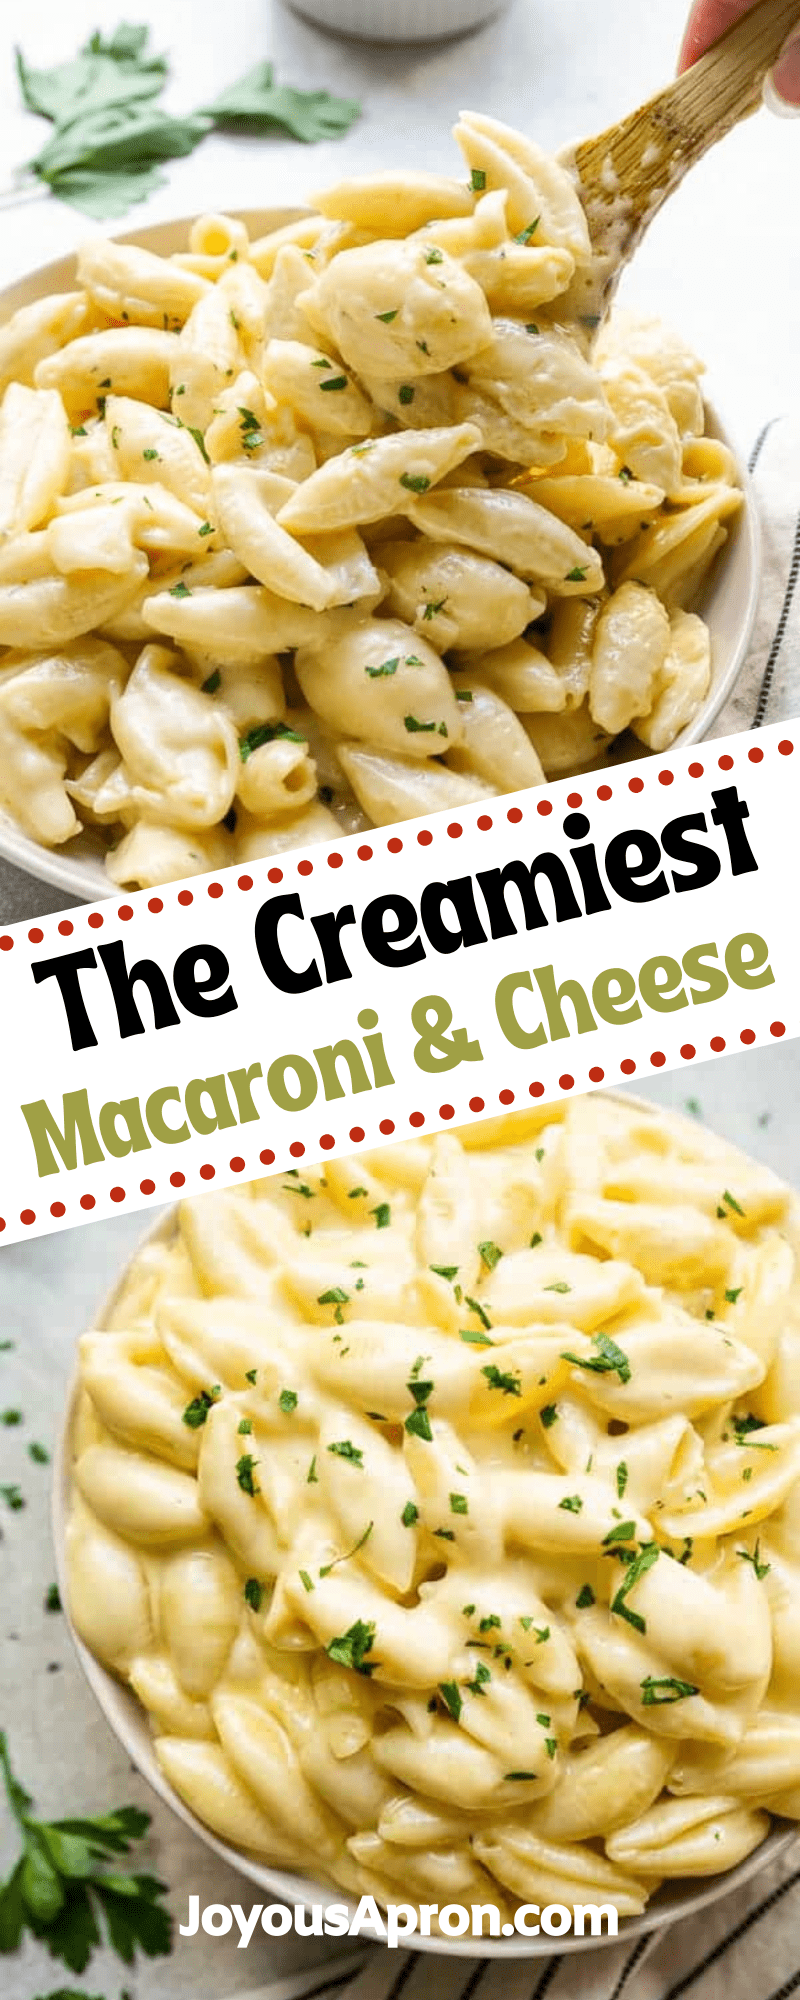 Macaroni and Cheese - a gourmet, adult and grown up version of mac and cheese, made with heavy cream, American cheese and white cheddar. Pasta is coated in a thick, creamy delicious cheese sauce. It's the classic all-American side dish for dinners and even the holidays! via @joyousapron